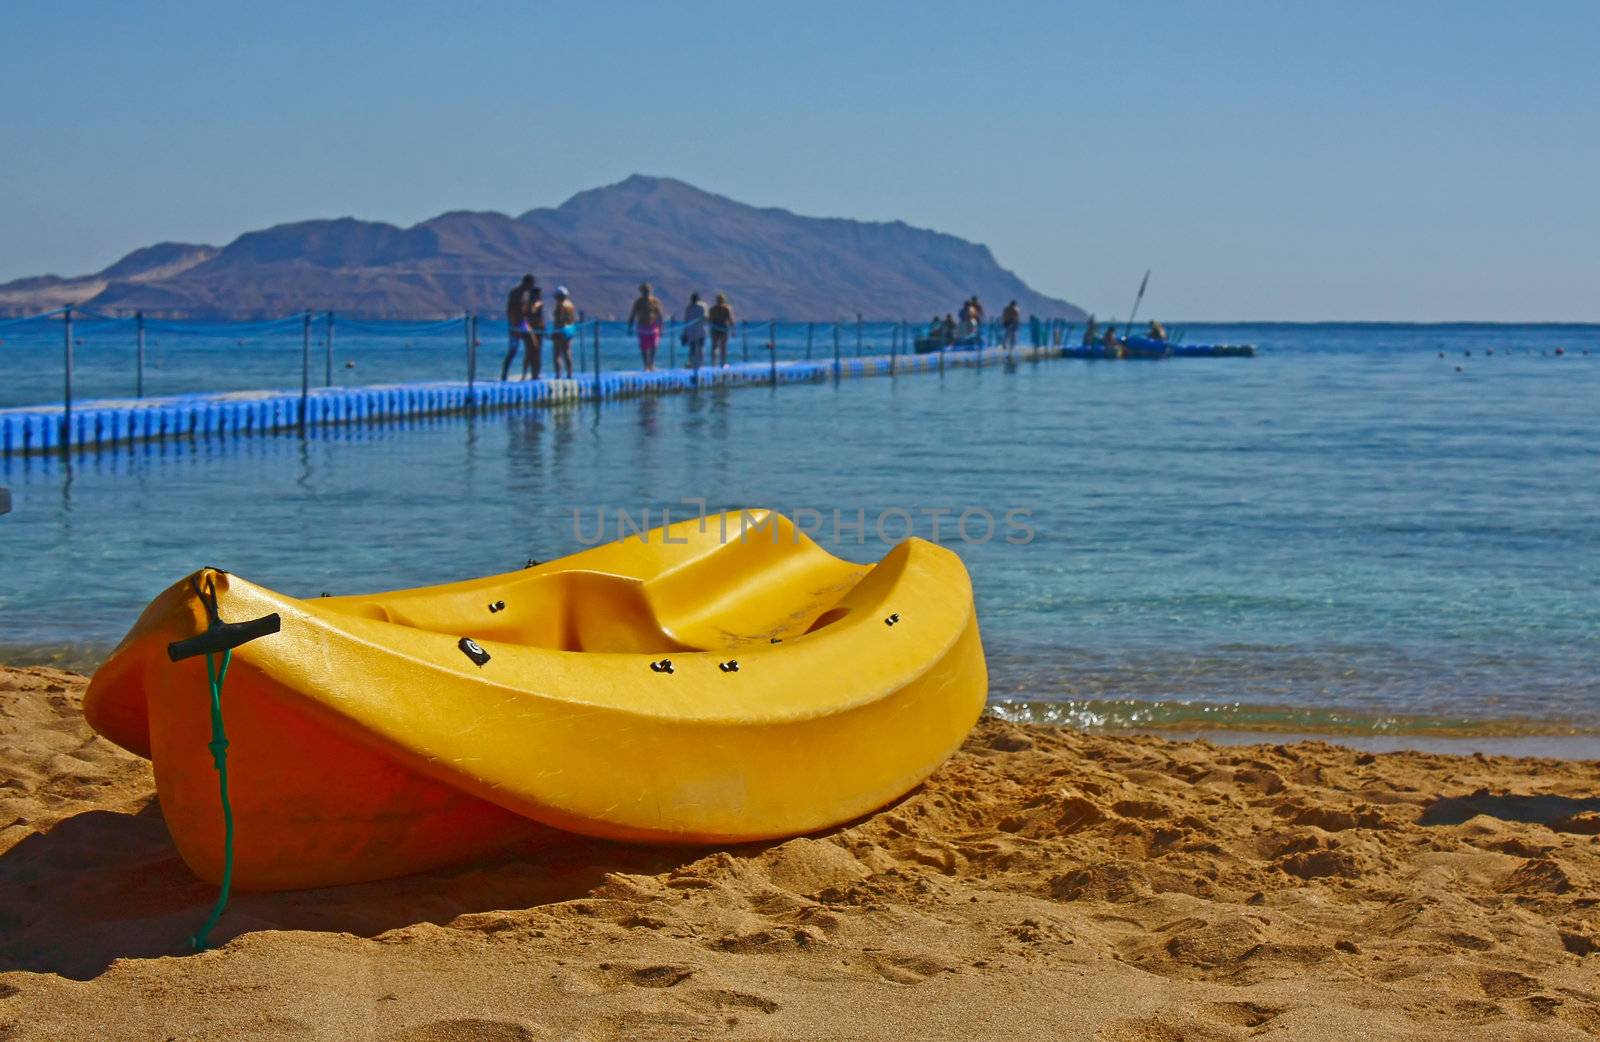 Egypt. On the beach, on the shore near the water is the kayak.